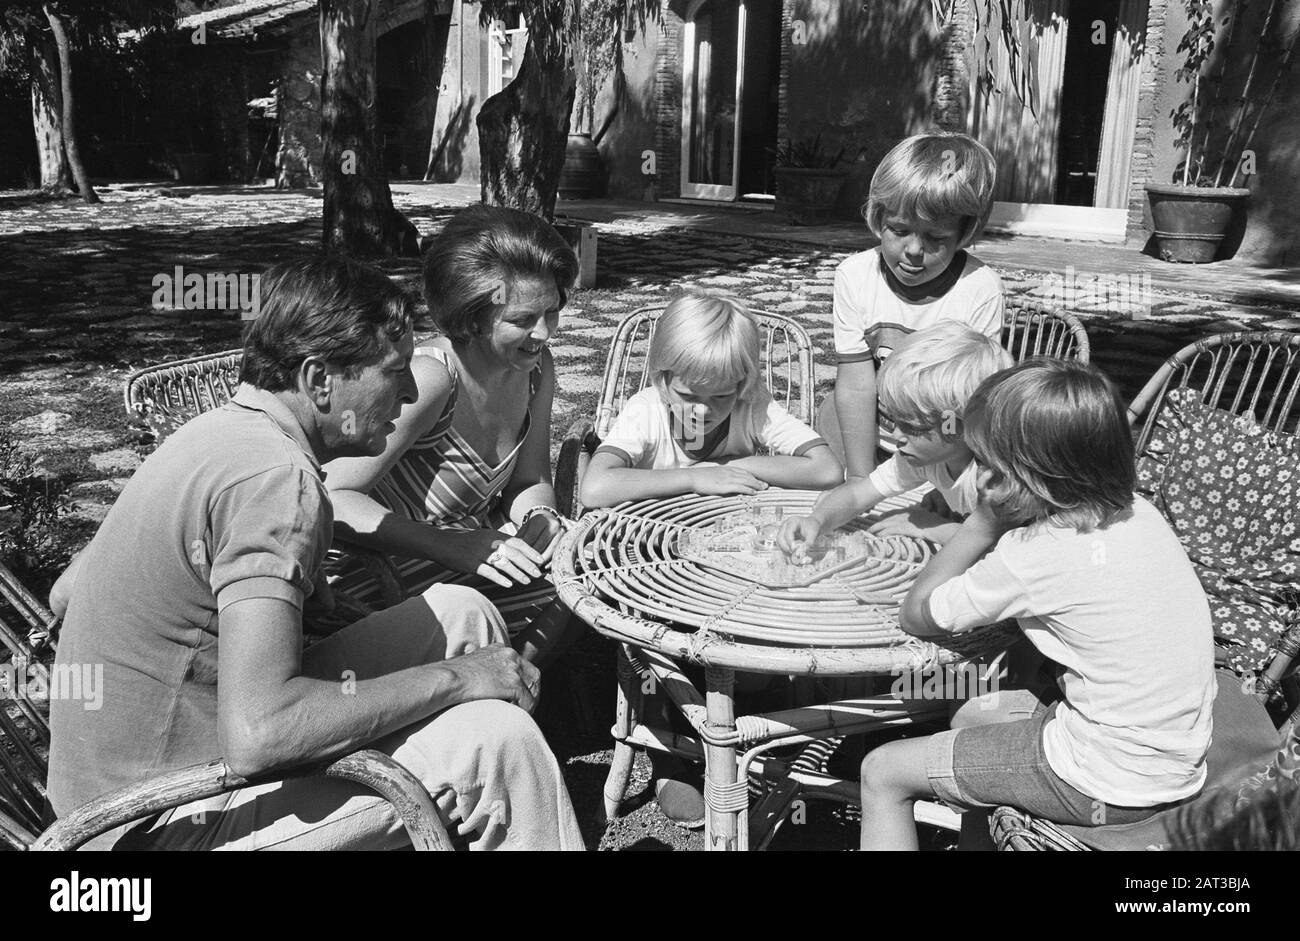 Princess Beatrix and Prince Claus with the children on holiday in Porto Ercole, Italy  The princely family at a board game; v.l.n.r. Prince Claus, Princess Beatrix, Prince Willem Alexander, Prince Johan Friso, prince Carlos and prince Constatijn Date: 20 July 1975 Location: Italy, Porto Ercole Keywords: board games, princes, princesses, holidays Personal name: Beatrix, princess, Carlos, prince, Claus, prince, prince, Constantine, prince, Johan Friso, prince, Willem-Alexander, prince Stock Photo